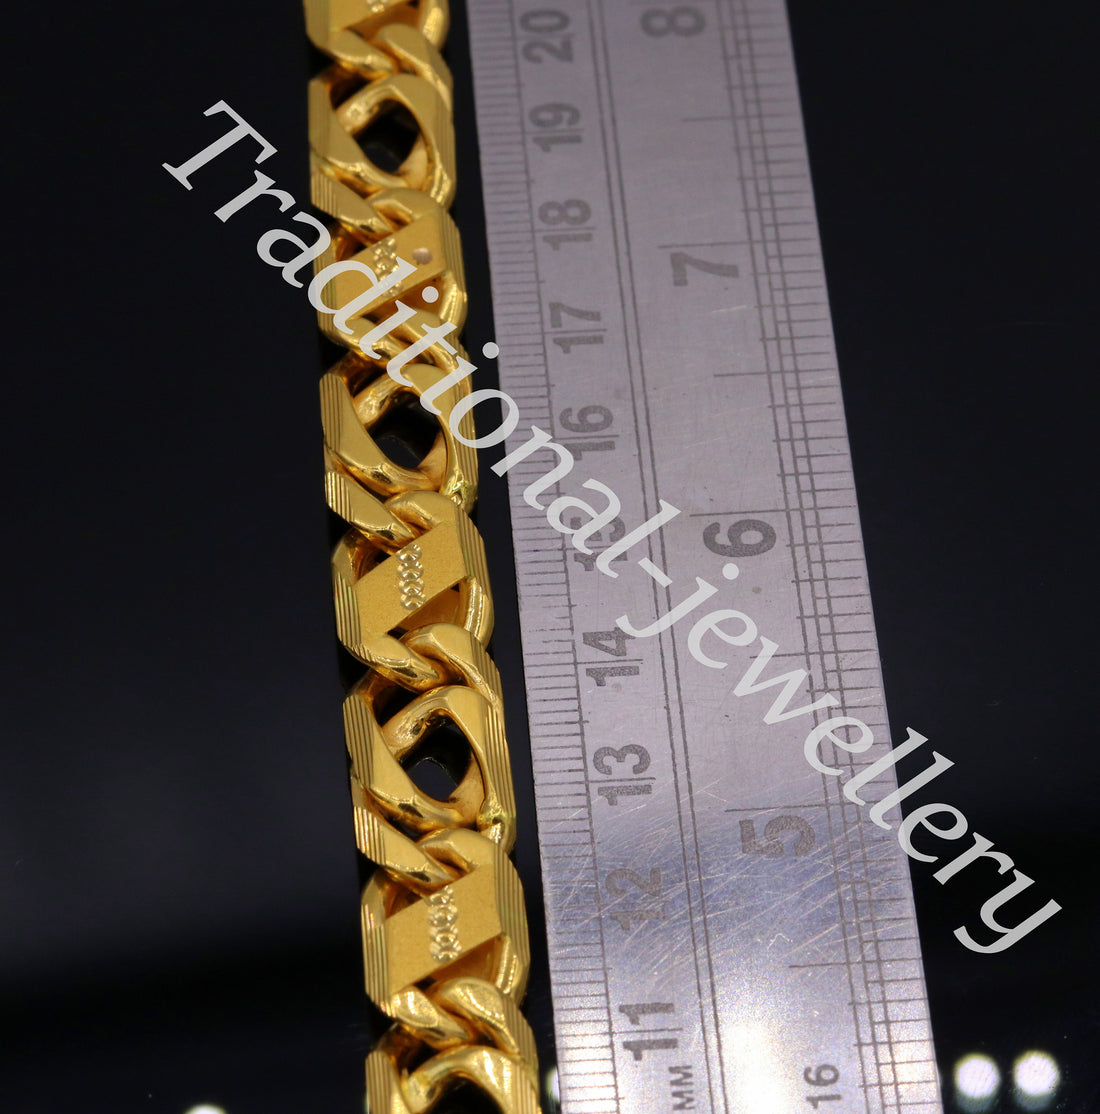 Traditional navabi chain style 22kt yellow gold handmade fabulous men's bracelet gifting jewelry - TRIBAL ORNAMENTS